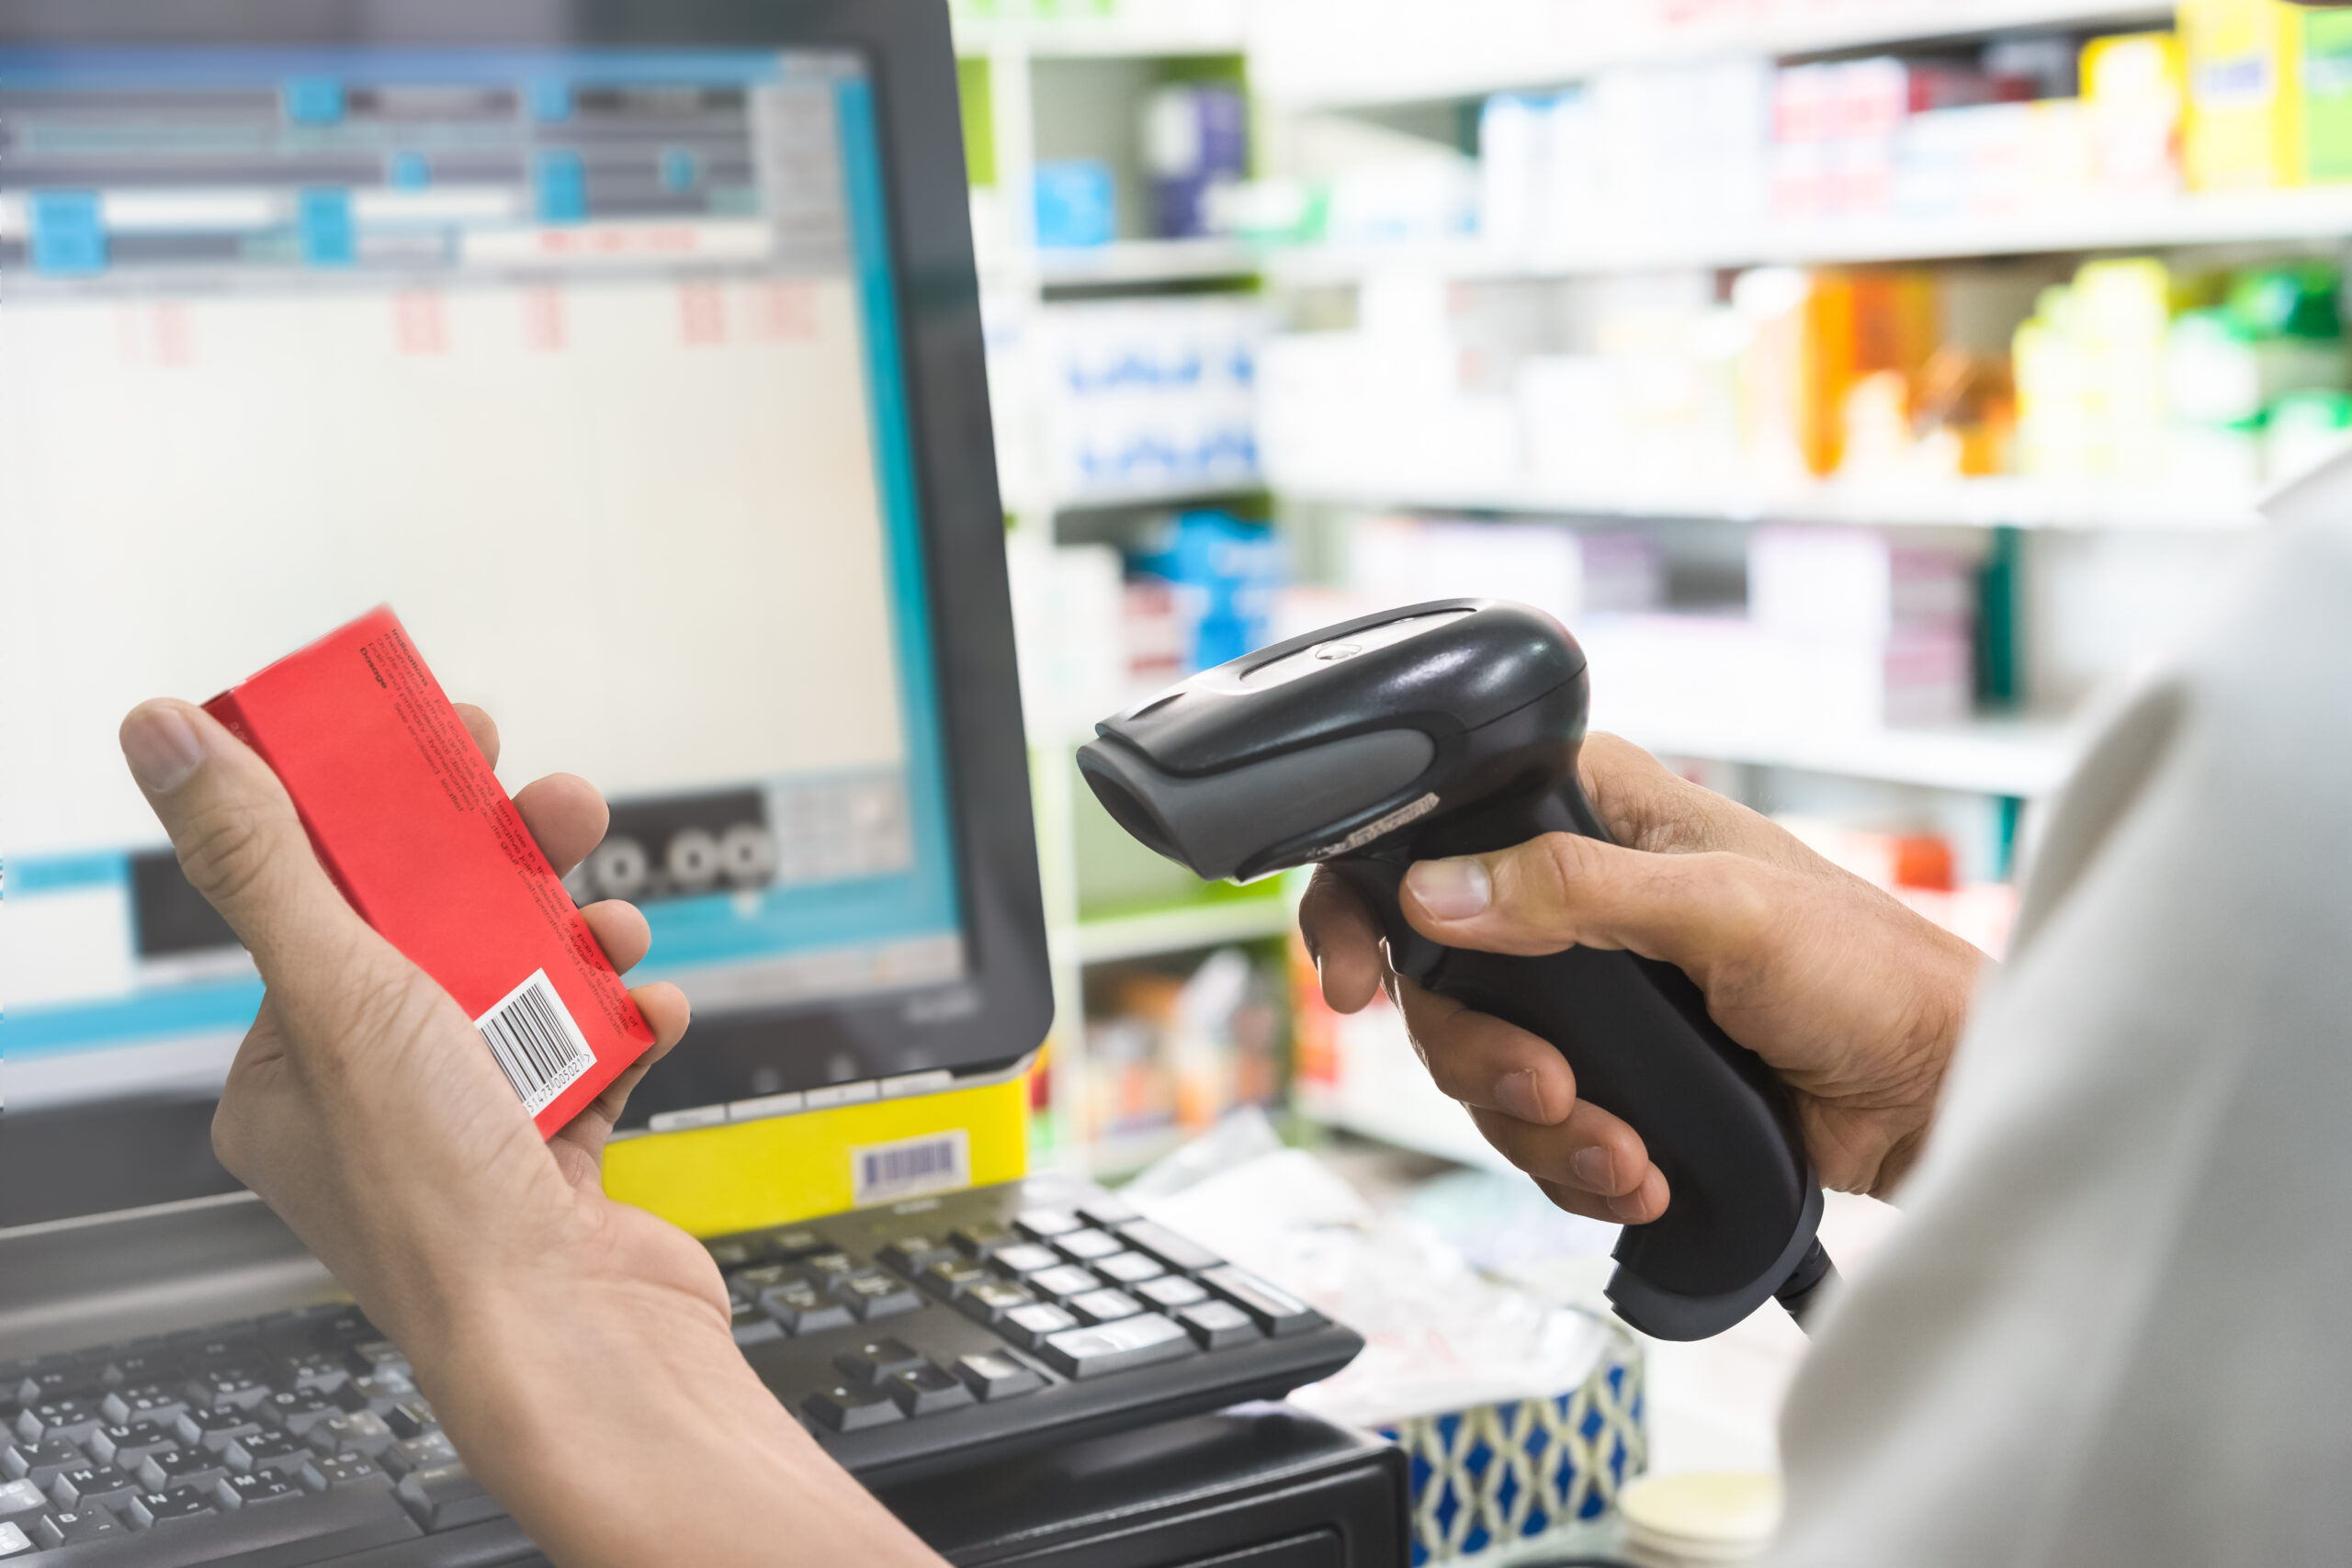 Pharmacist scanning a red medicine box barcode.